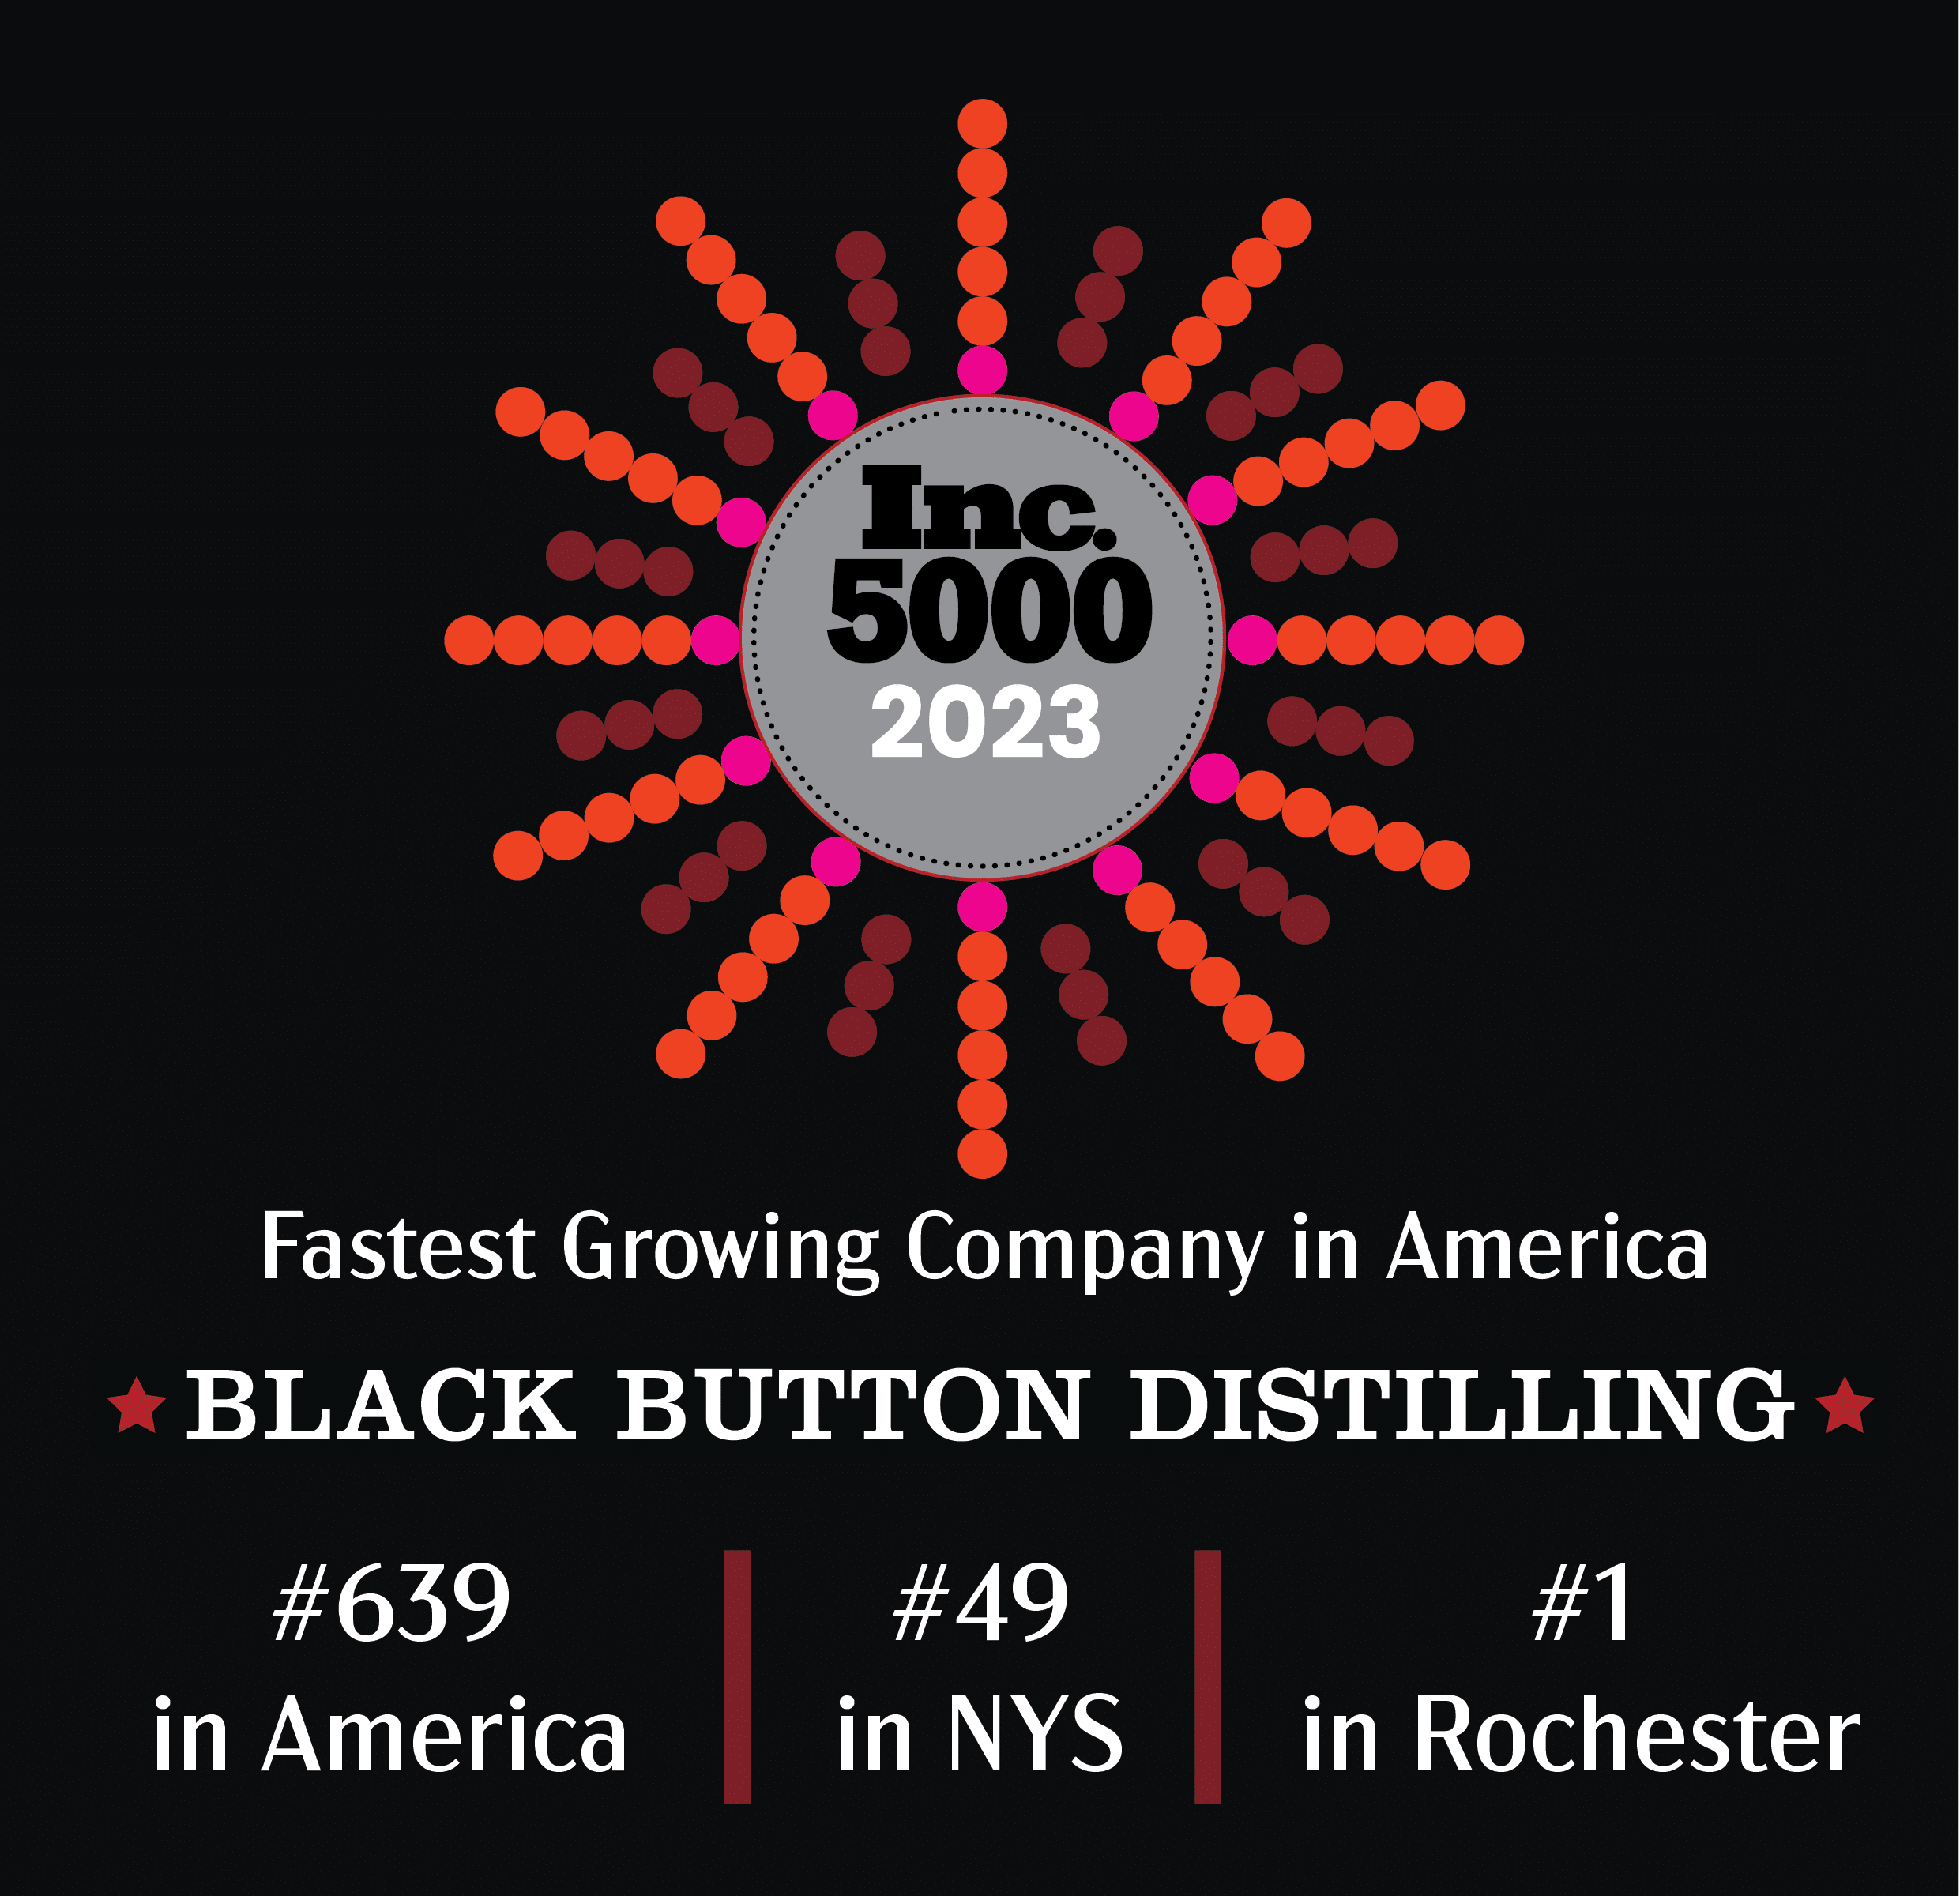 Black Button Distilling, #1 Fastest Growing Private Company in Rochester